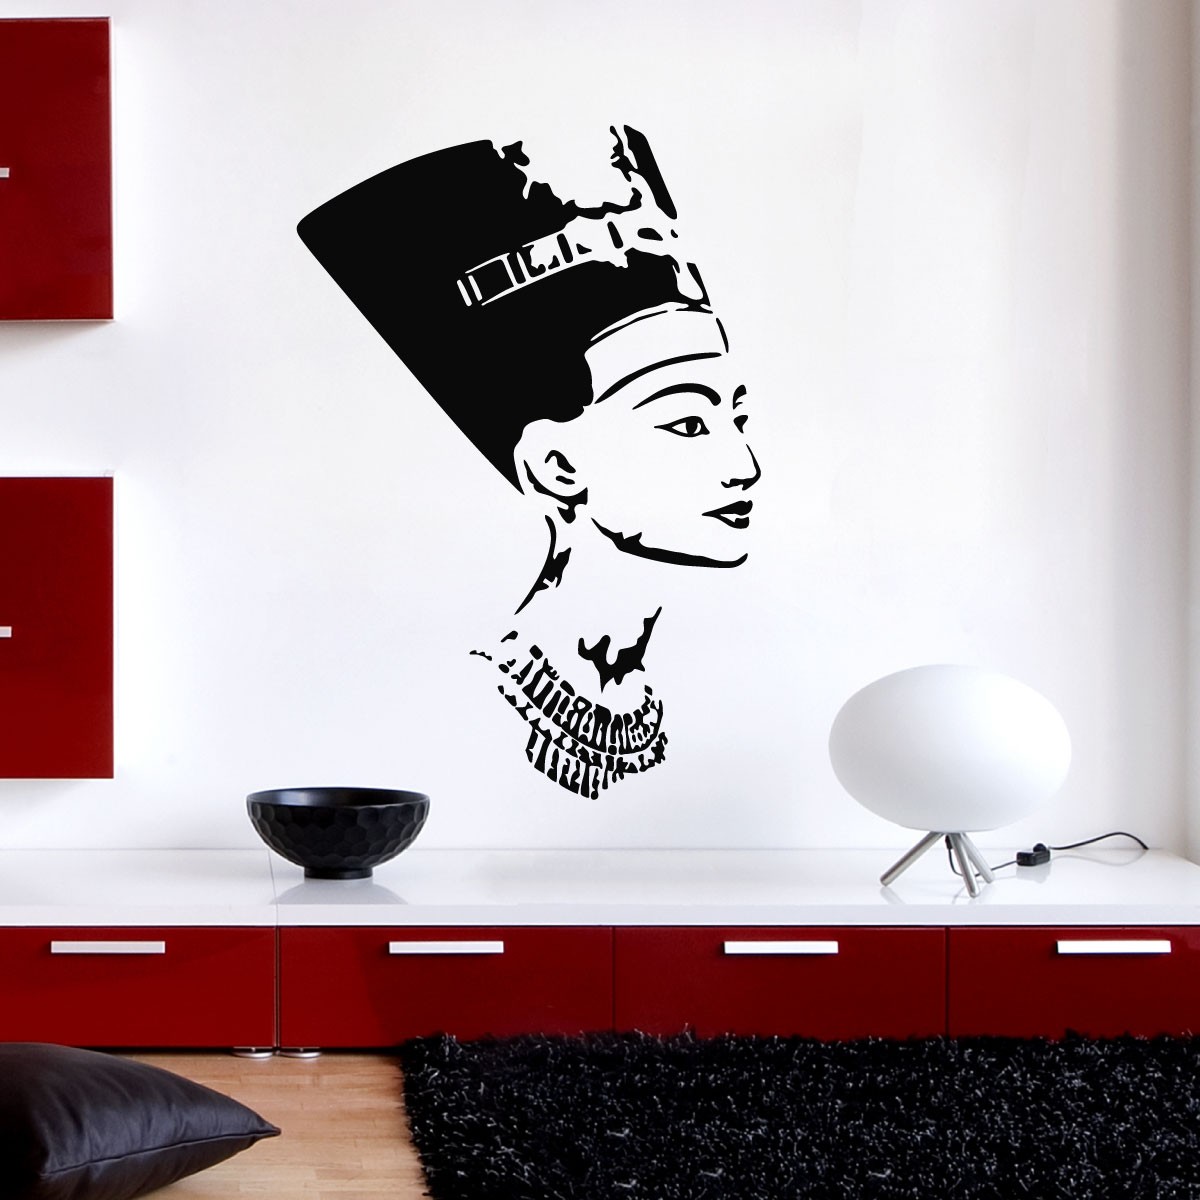 Sticker Bain cheap - Home discount - wall stickers - madeco-stickers